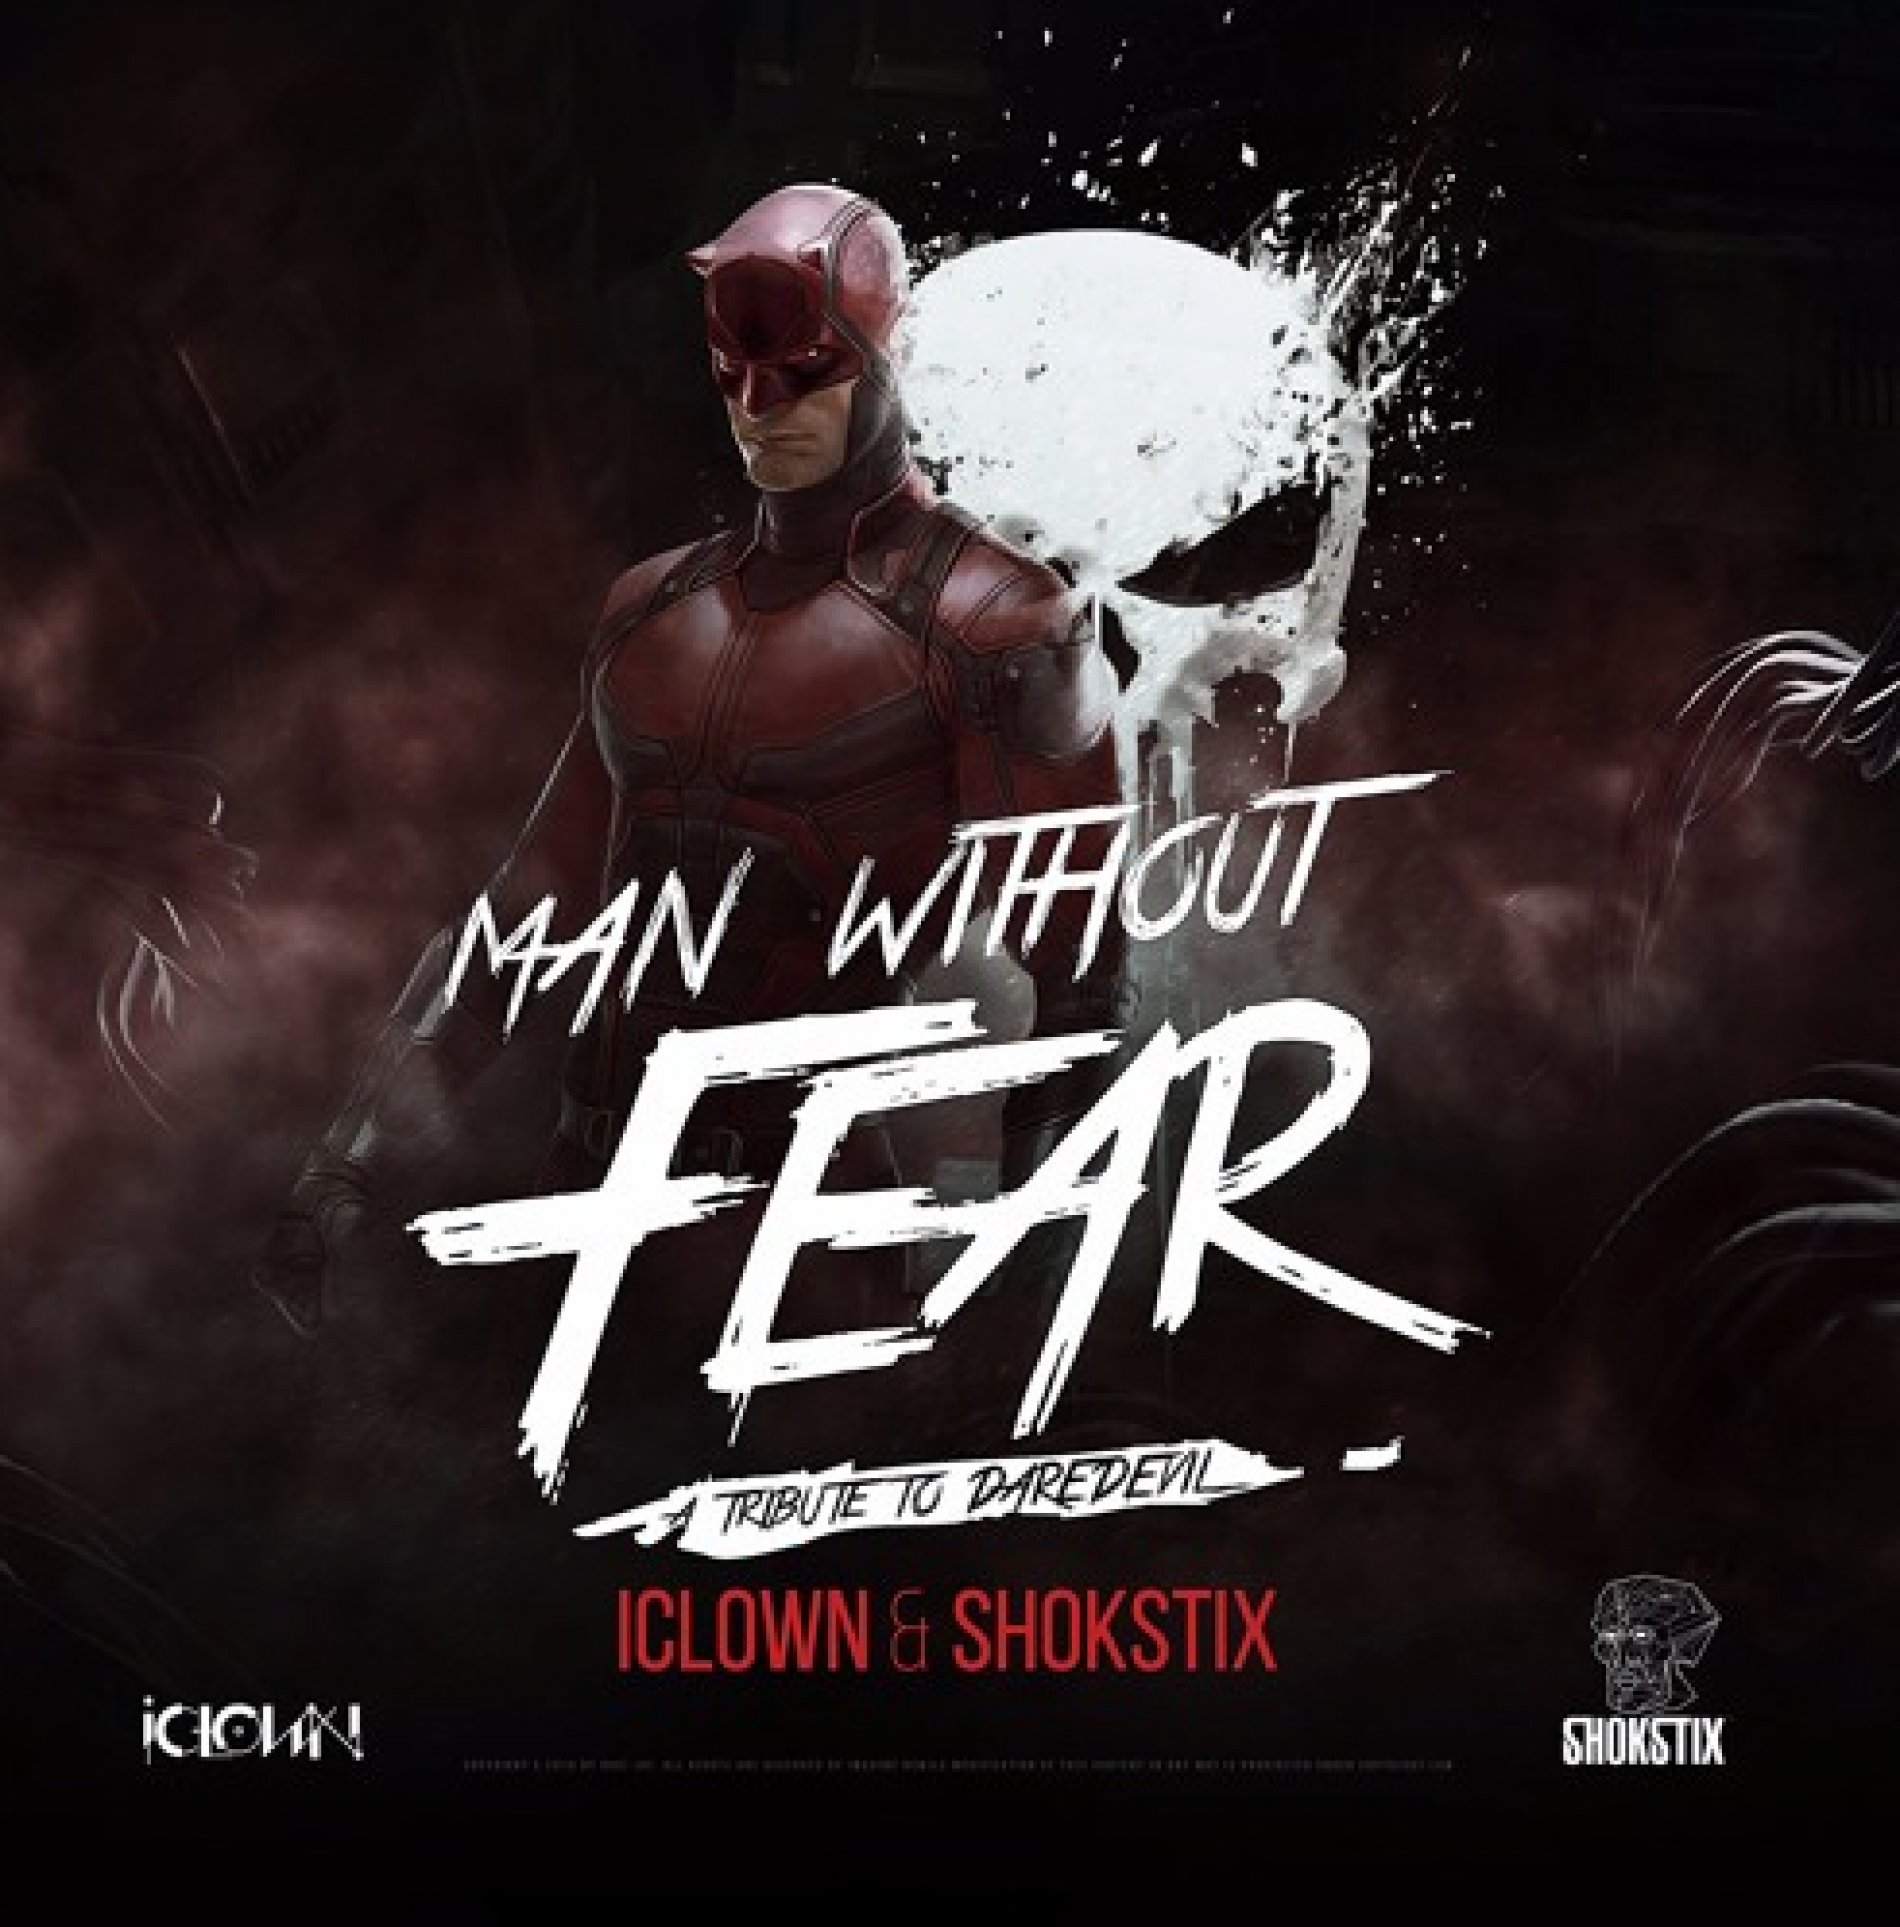 iClown & Shokstix- Man Without Fear (A Tribute to Daredevil)